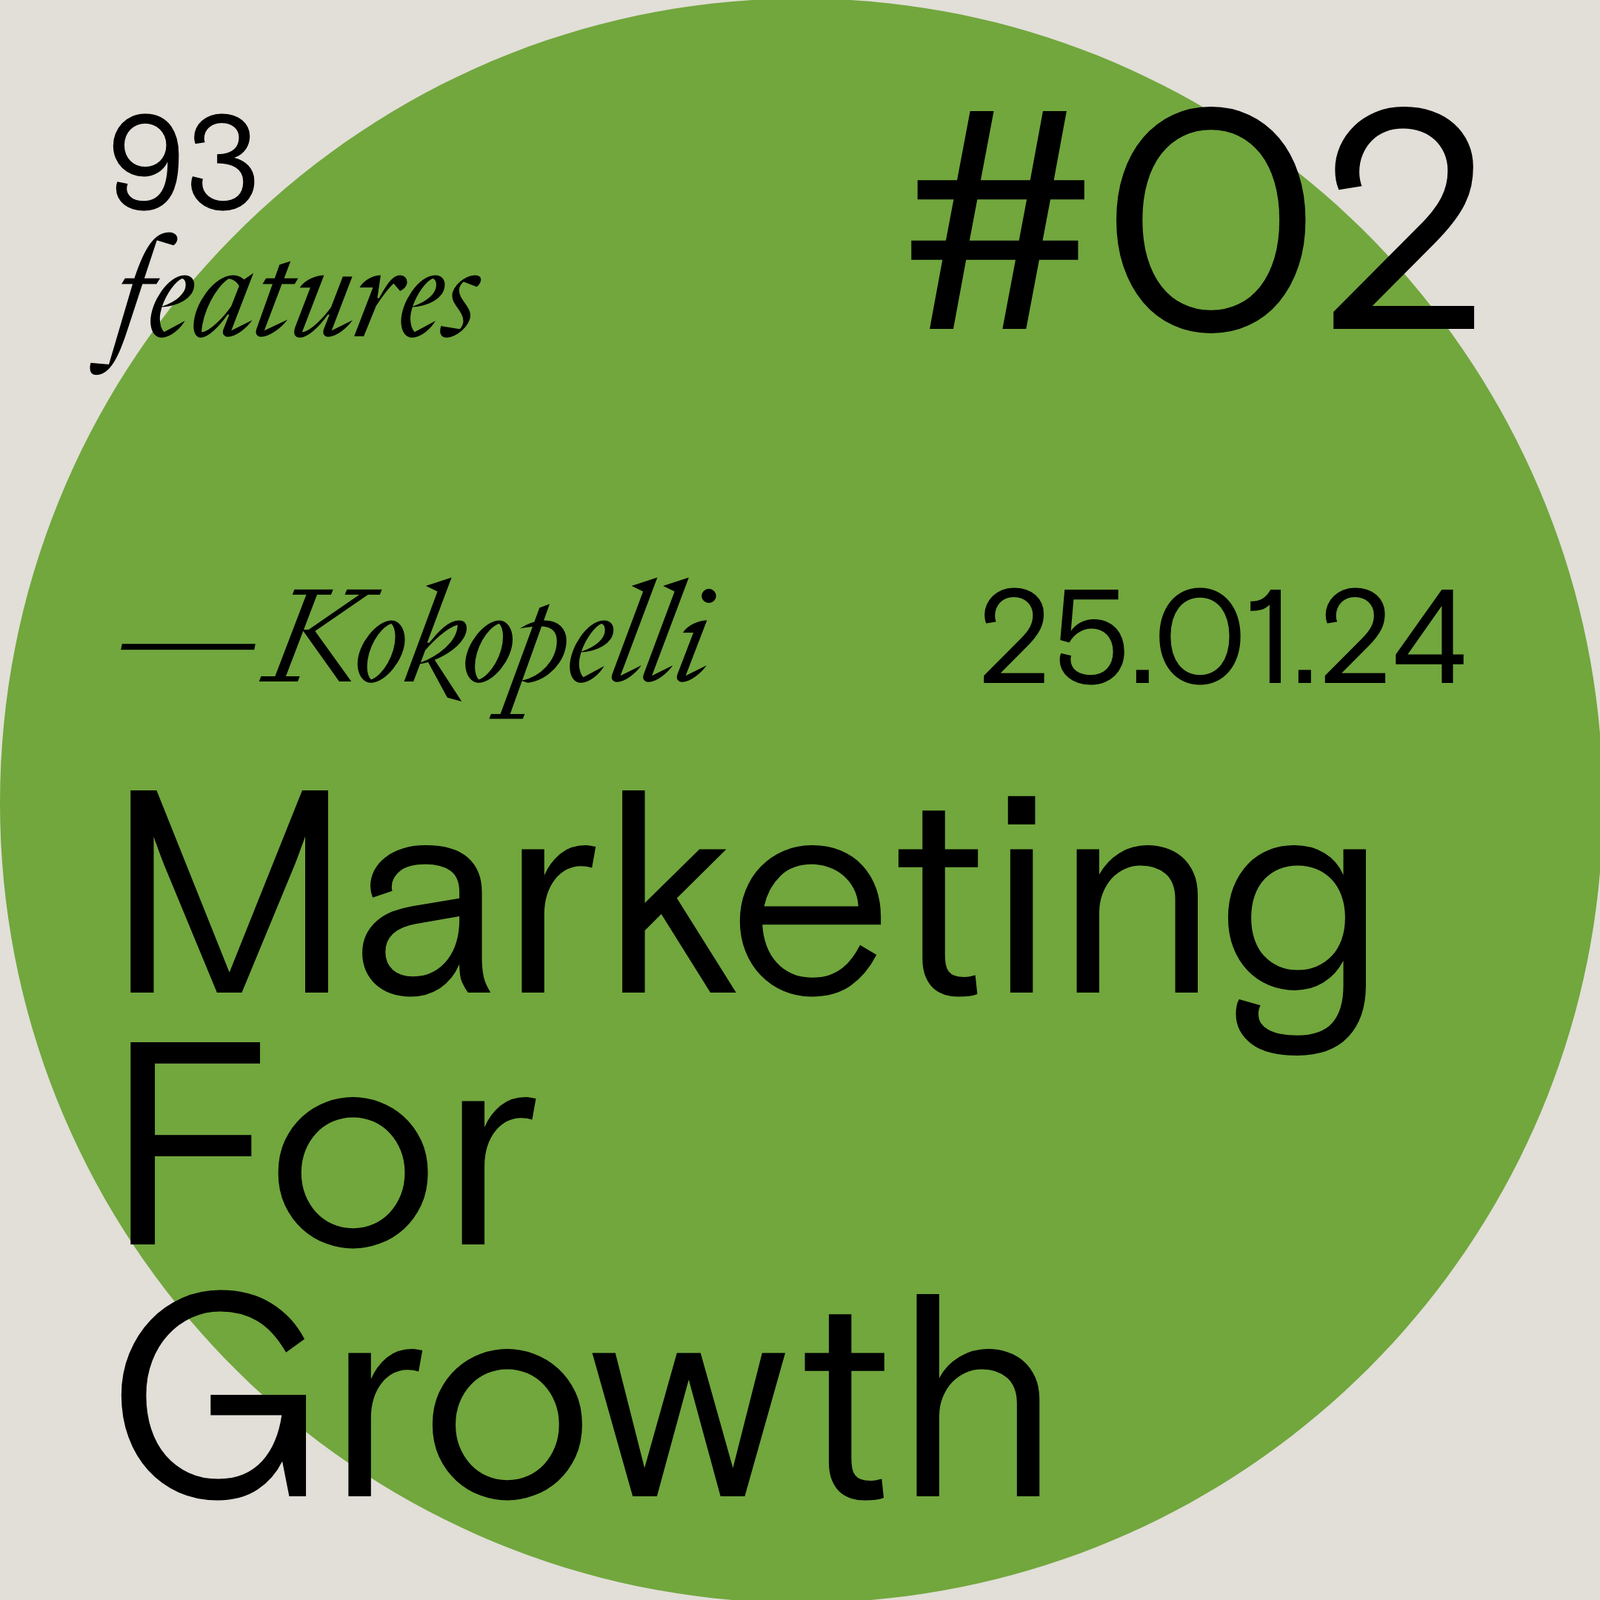 93 features - Marketing For Growth, with London based marketing agency Kokopelli